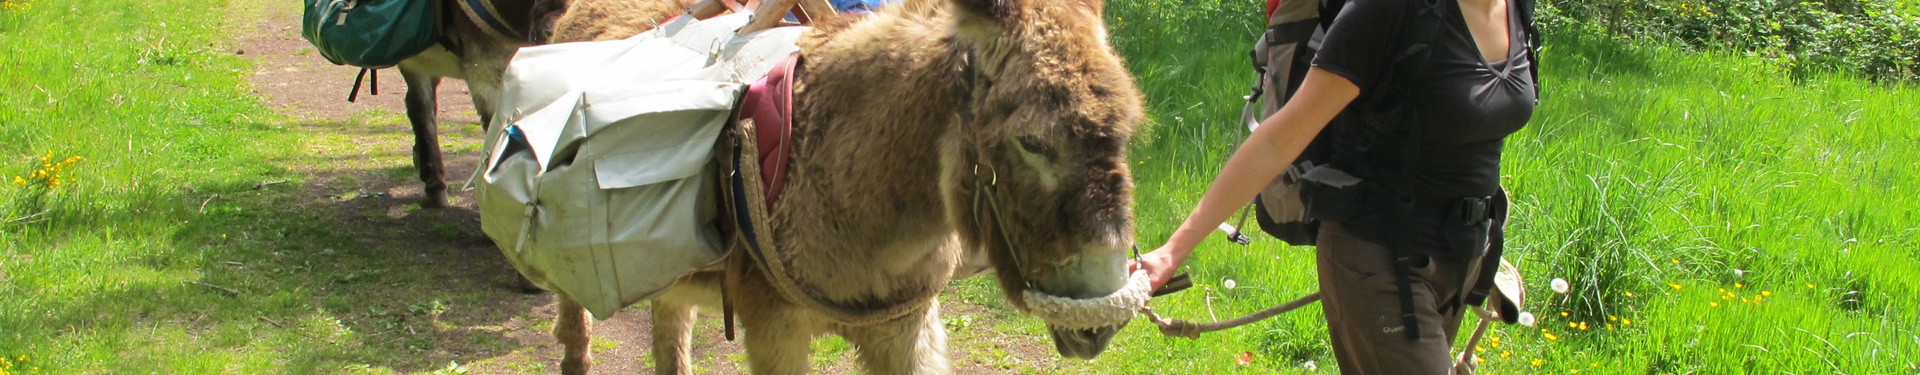 5 days with a donkey in Auvergne | Aluna Voyages